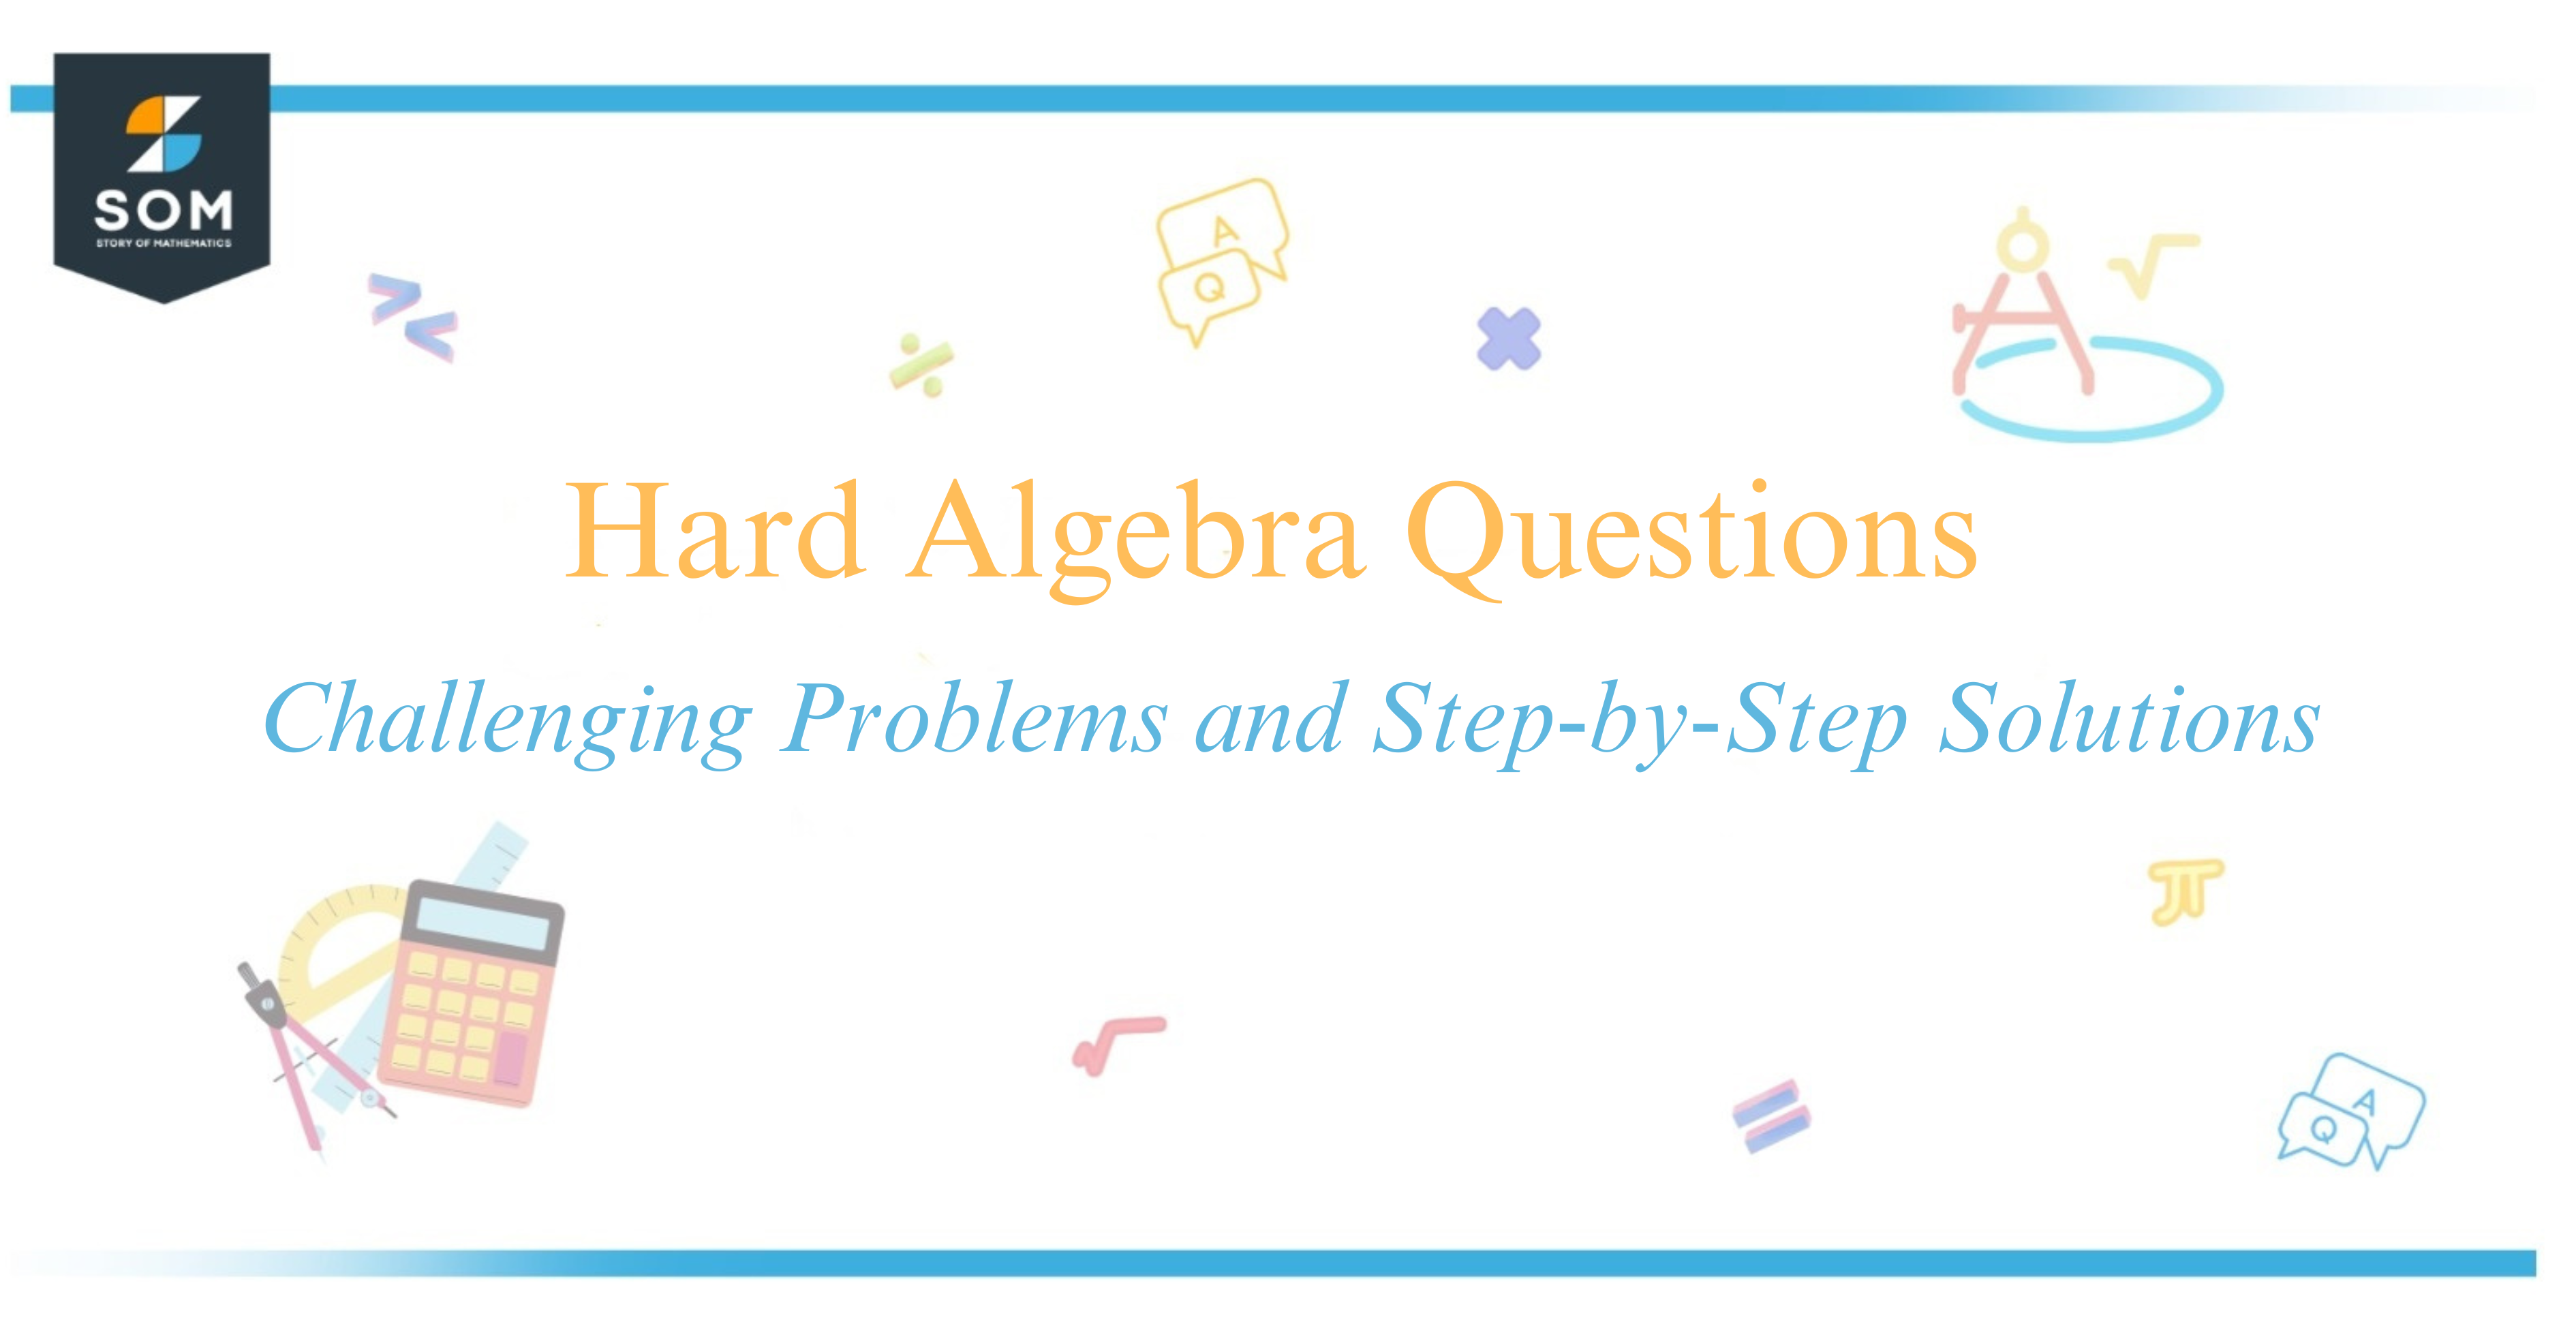 Hard Algebra Questions Challenging Problems and Step-by-Step Solutions